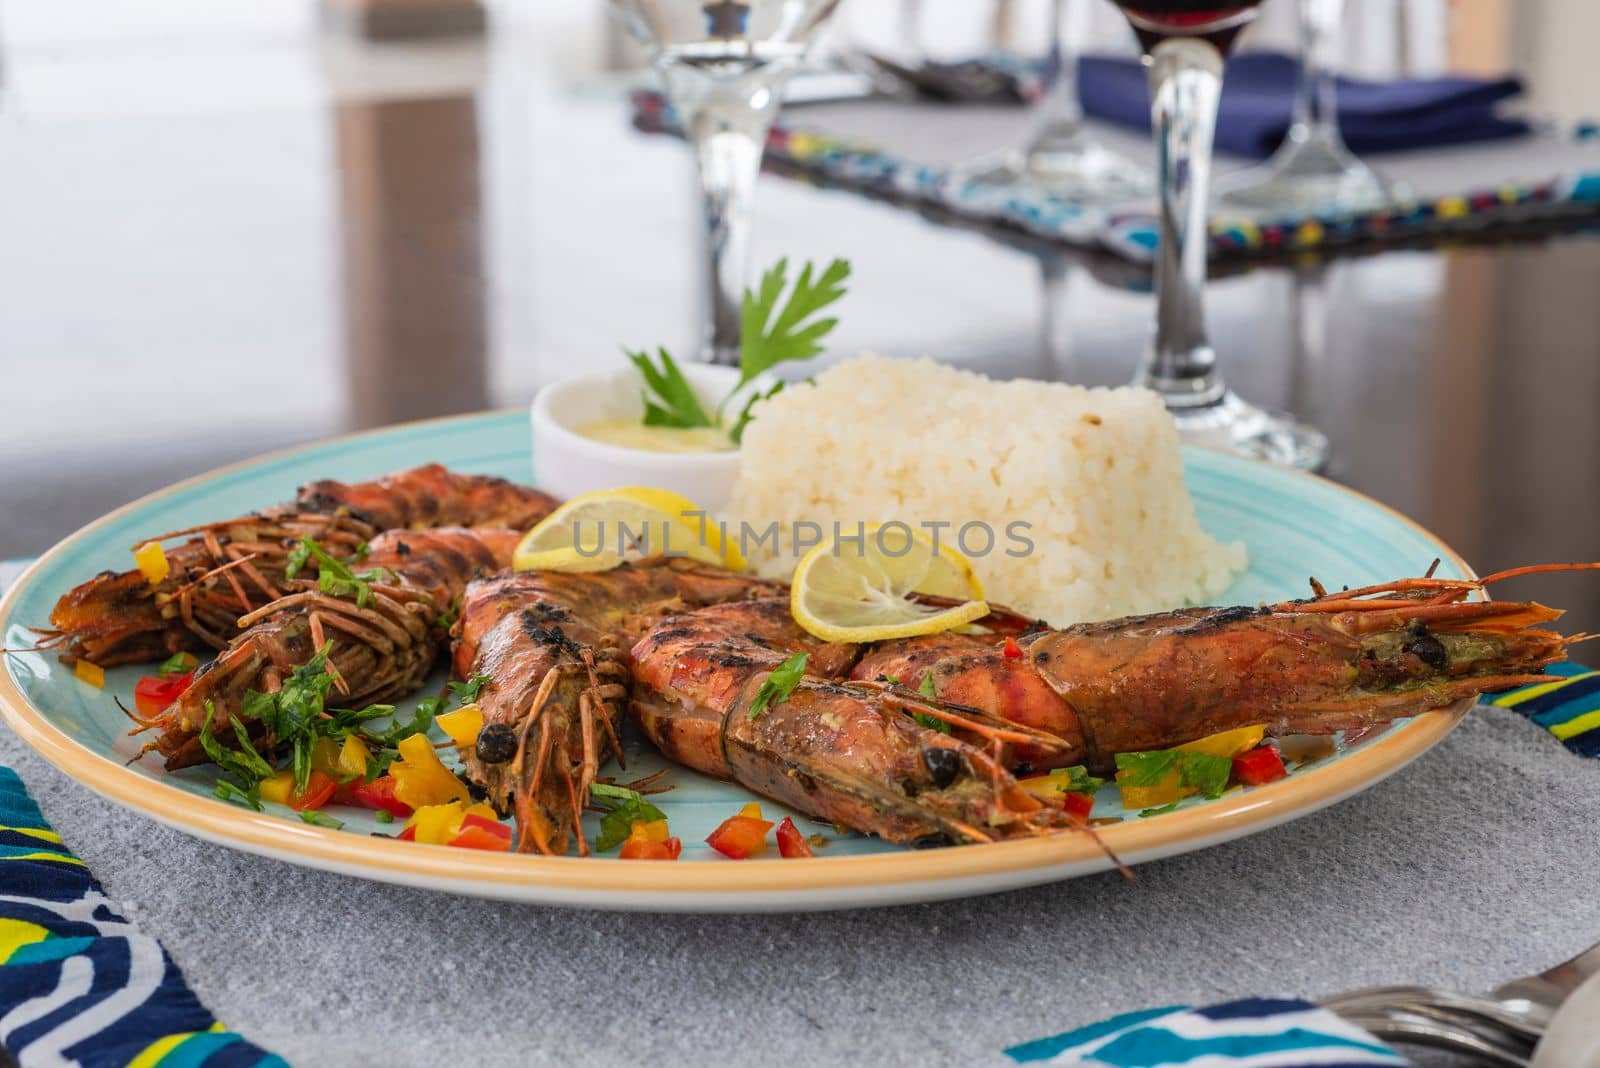 Tiger prawn shrimp a la carte meal with white steamed rice and wine at restaurant table setting